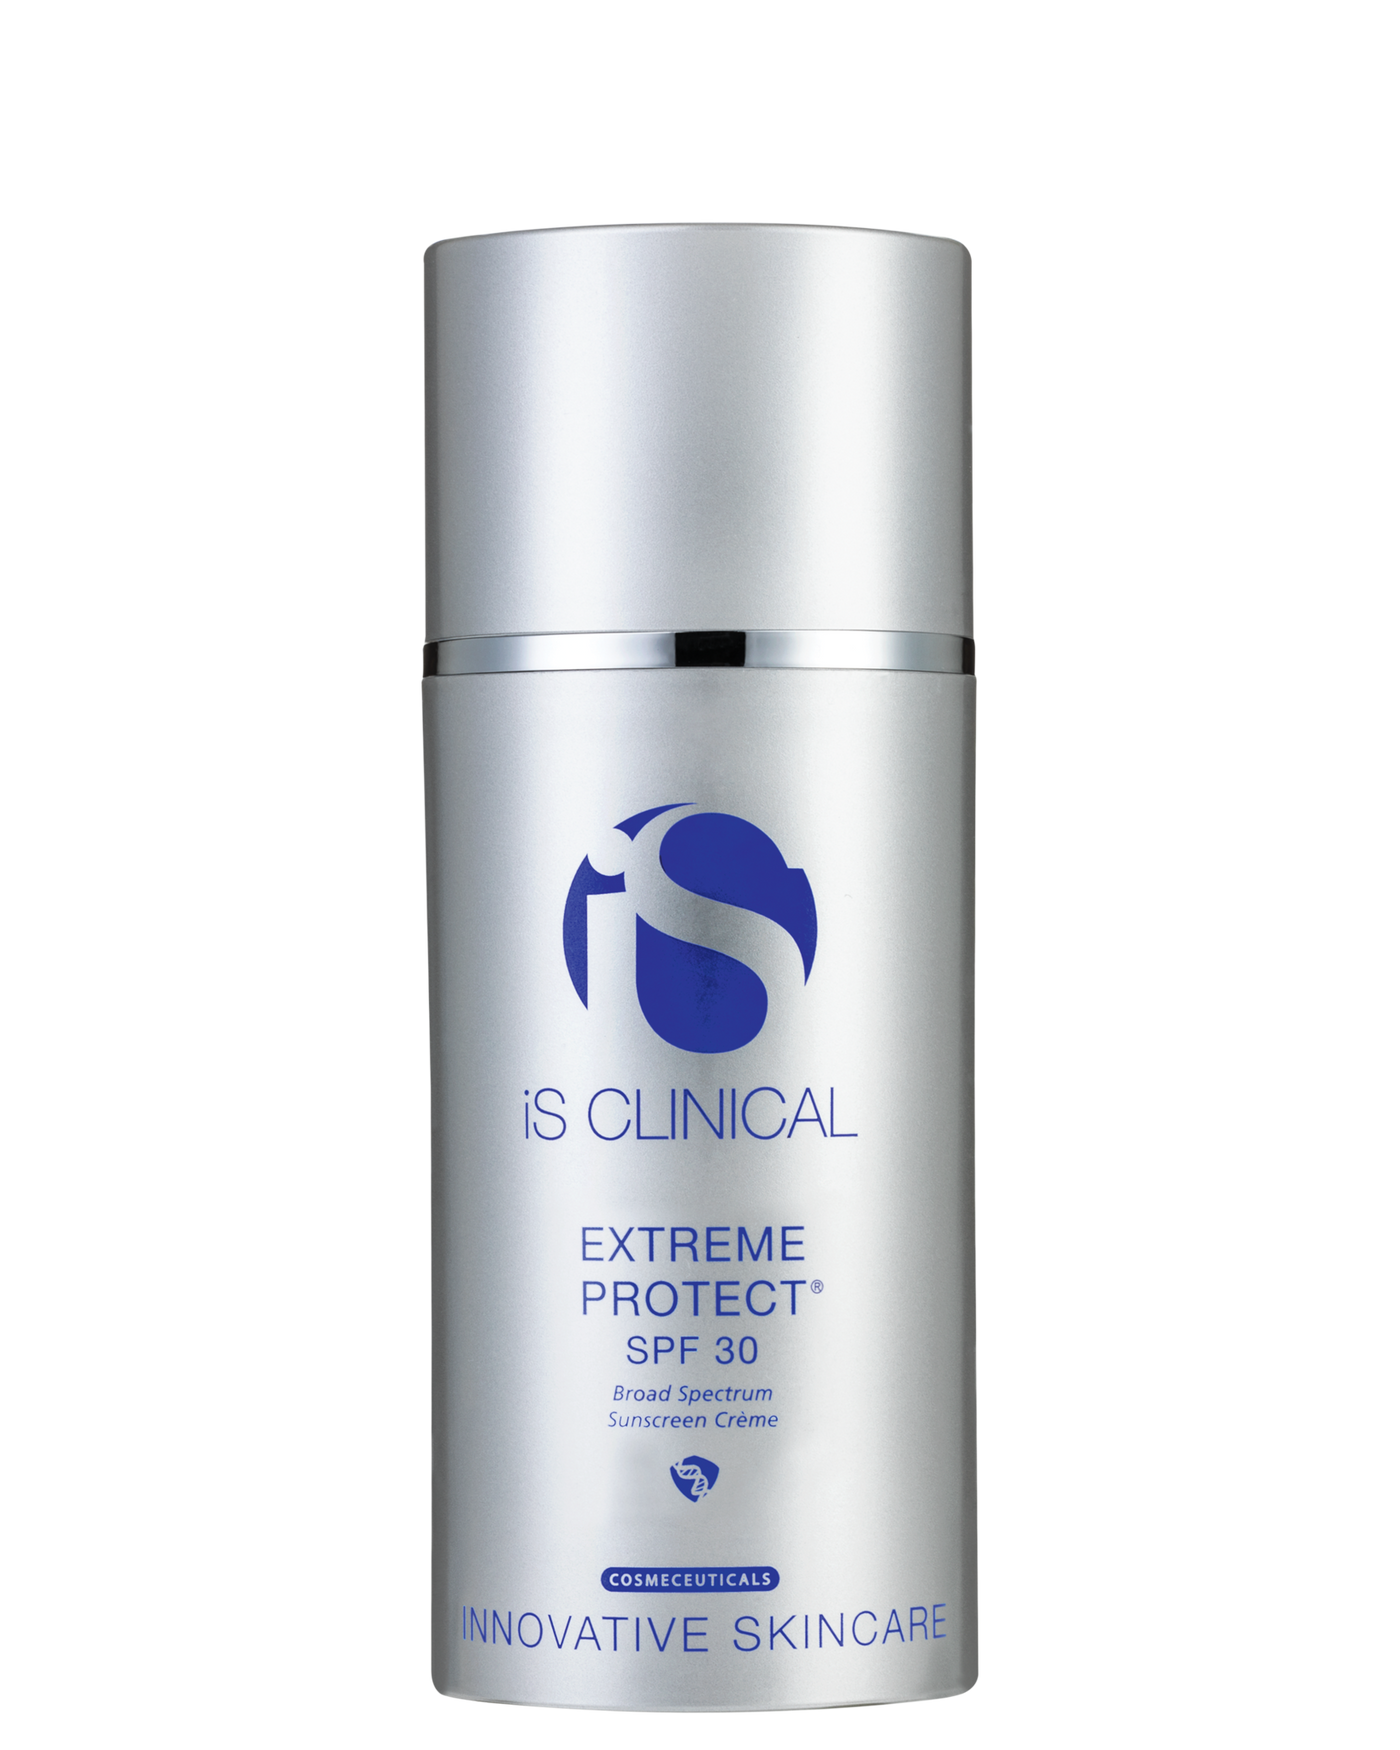 iSClinical Extreme Protect SPF30